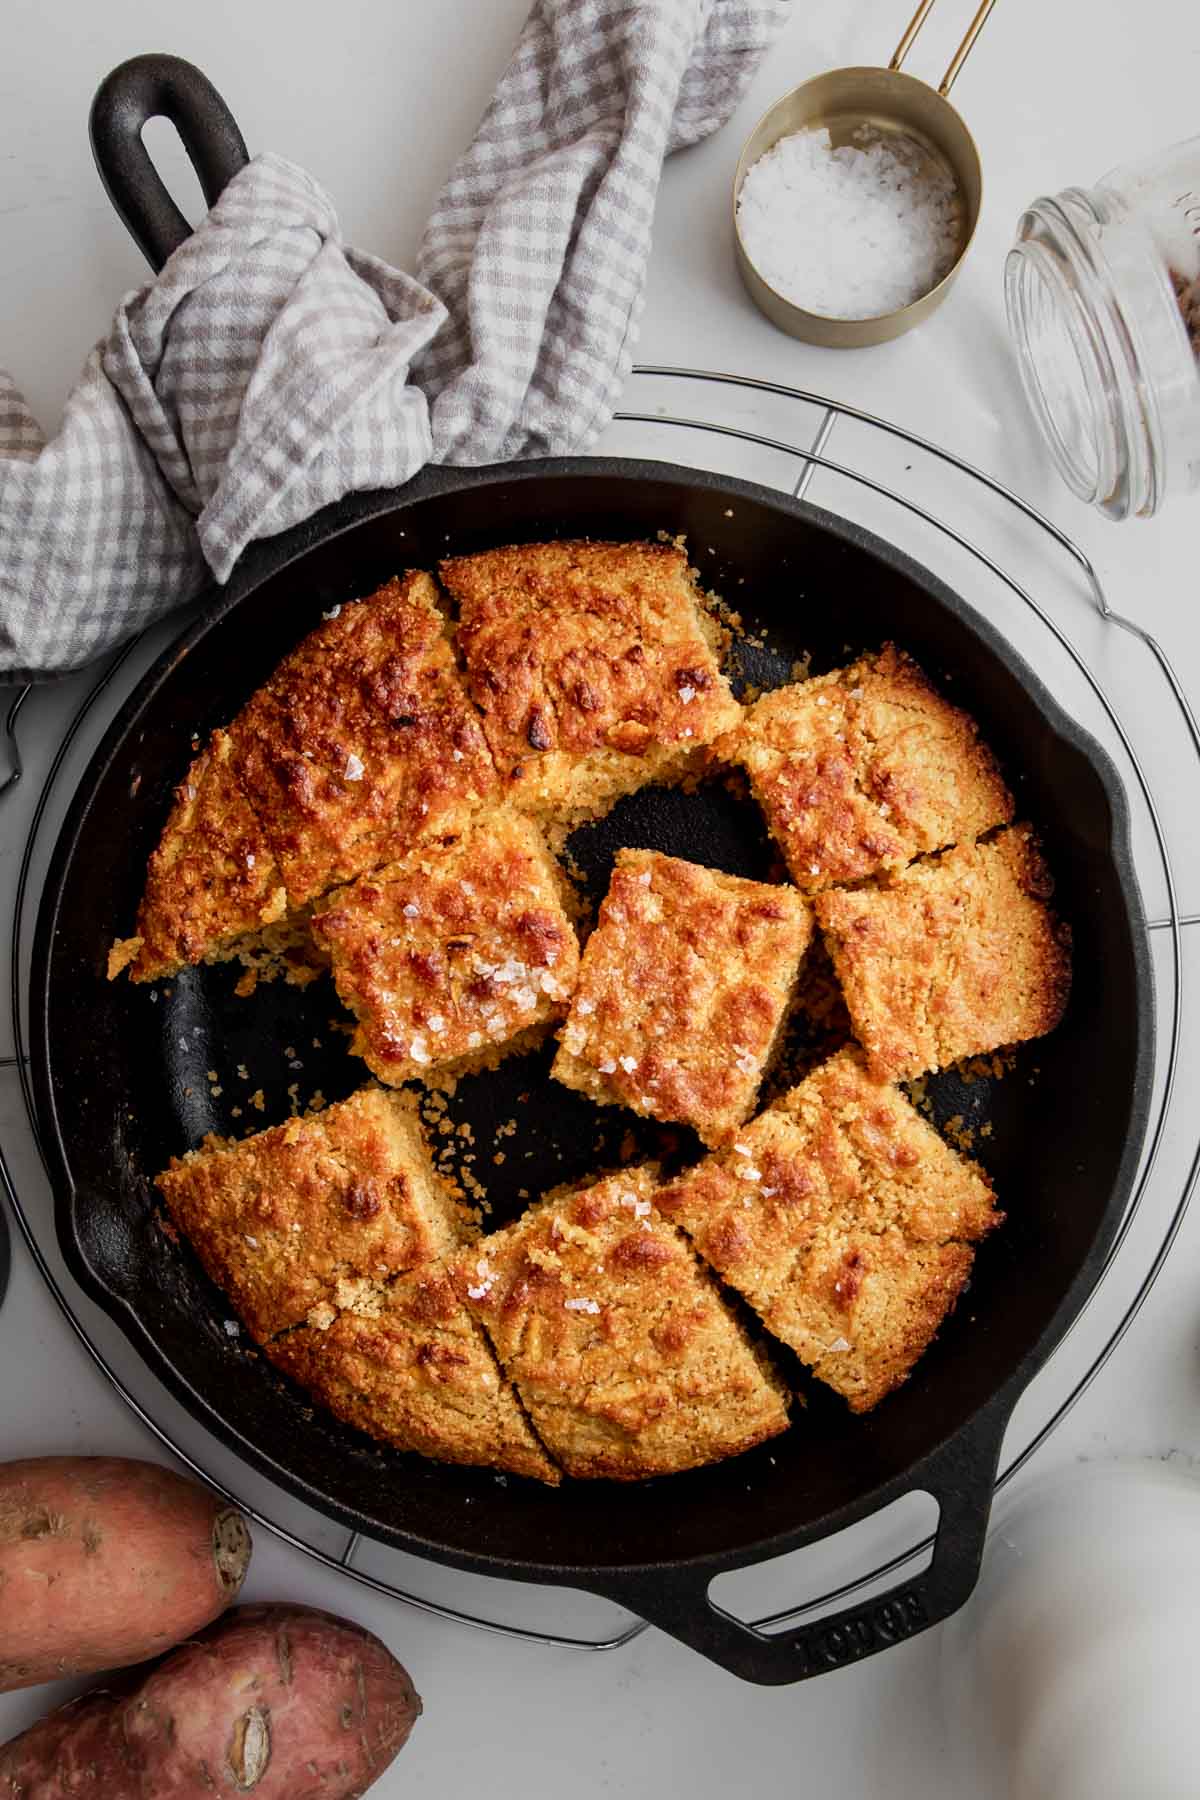 Cornbread cut in squares in a cast iron skillet placed on a wire rack.